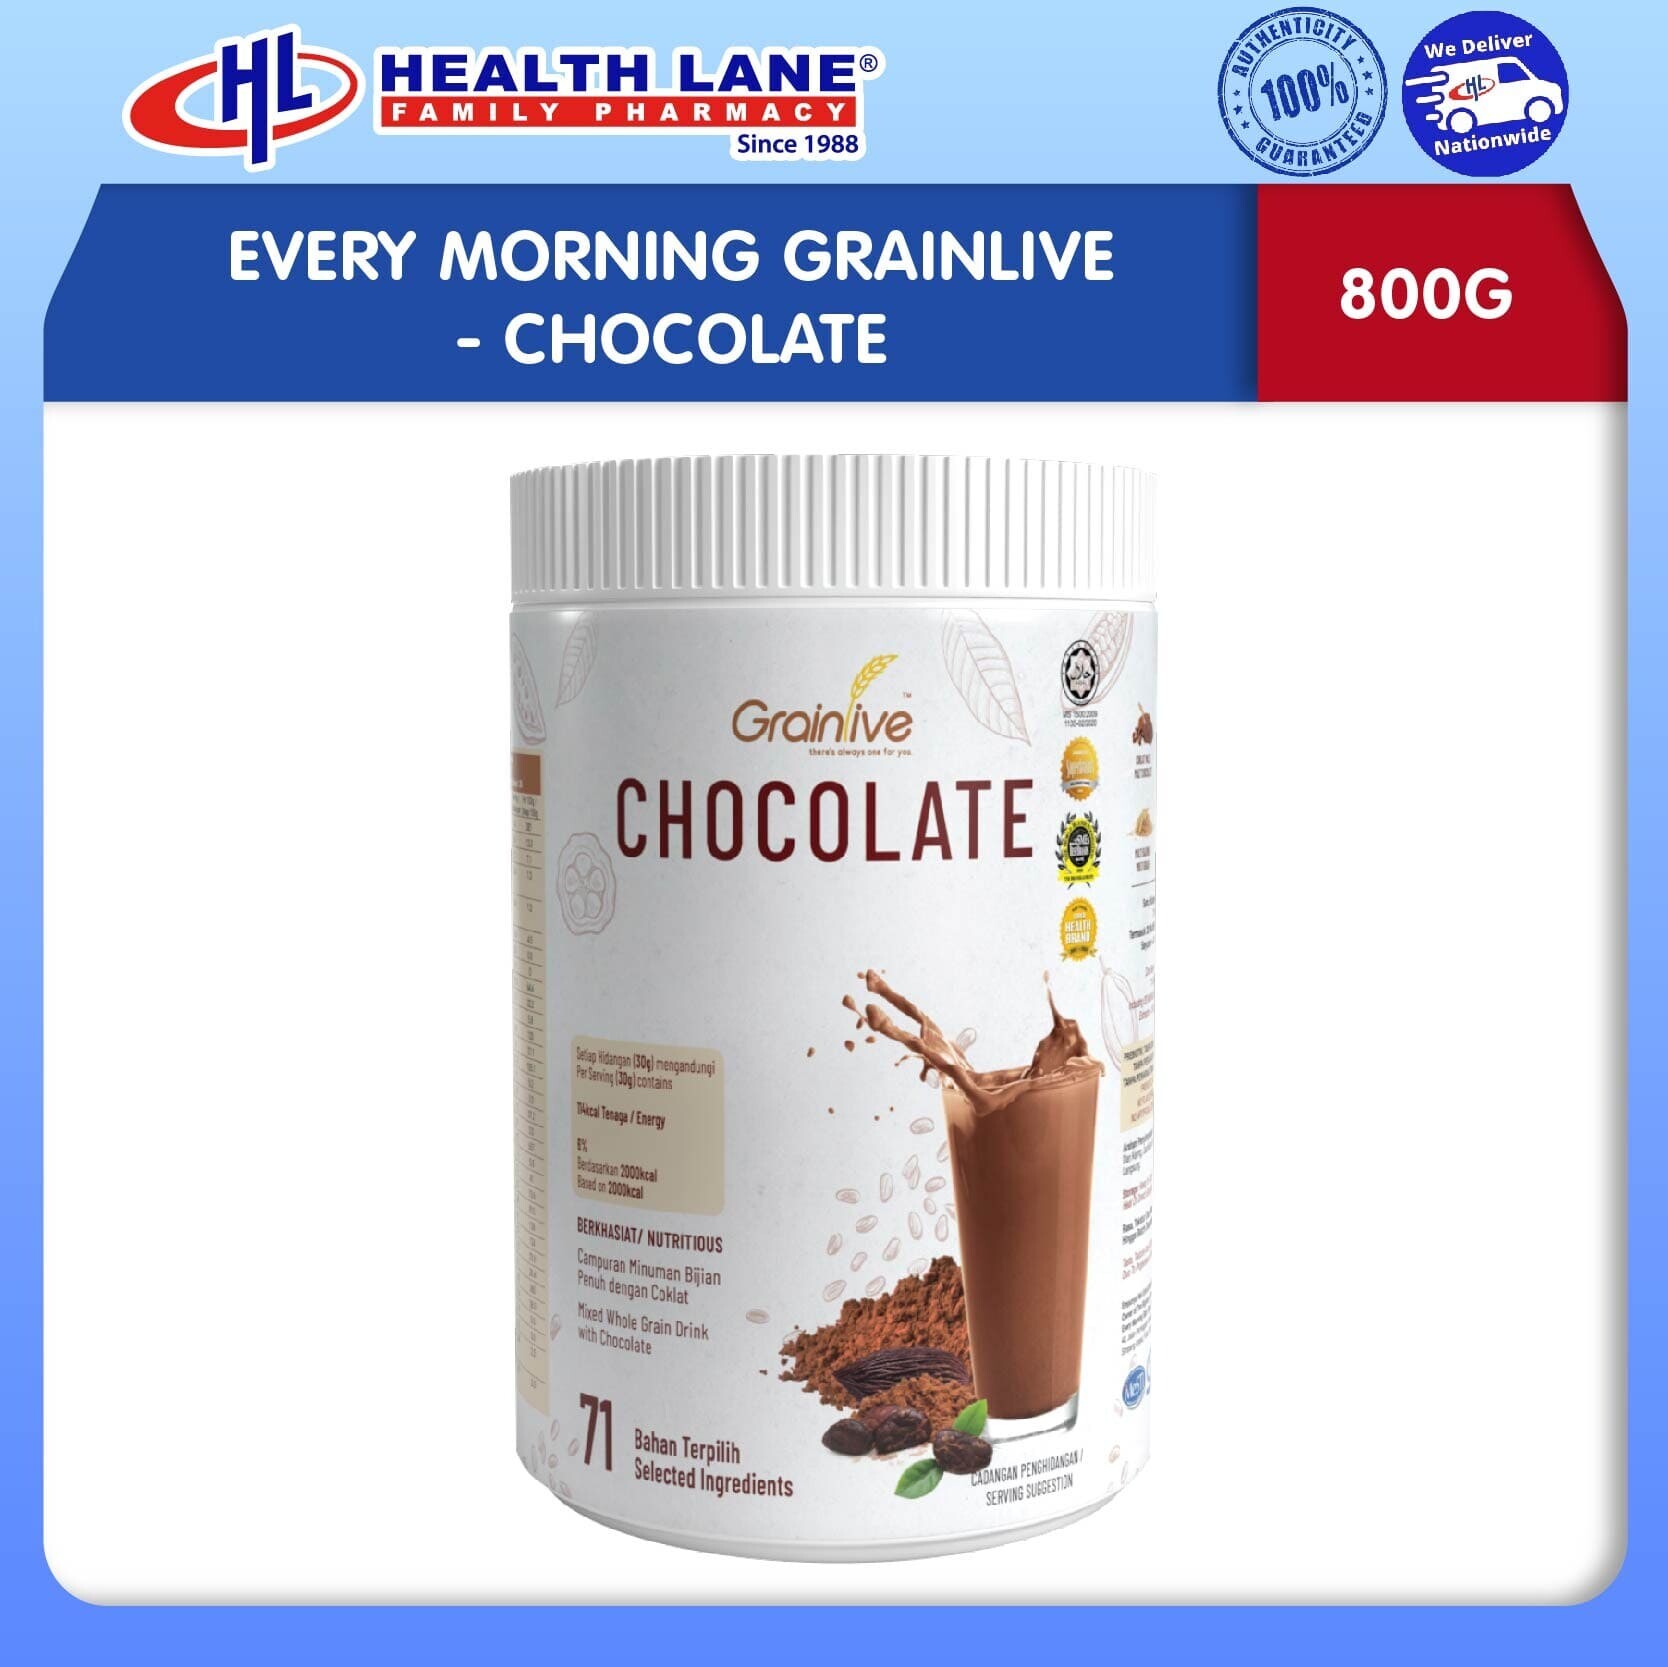 EVERY MORNING GRAINLIVE - CHOCOLATE (800G)